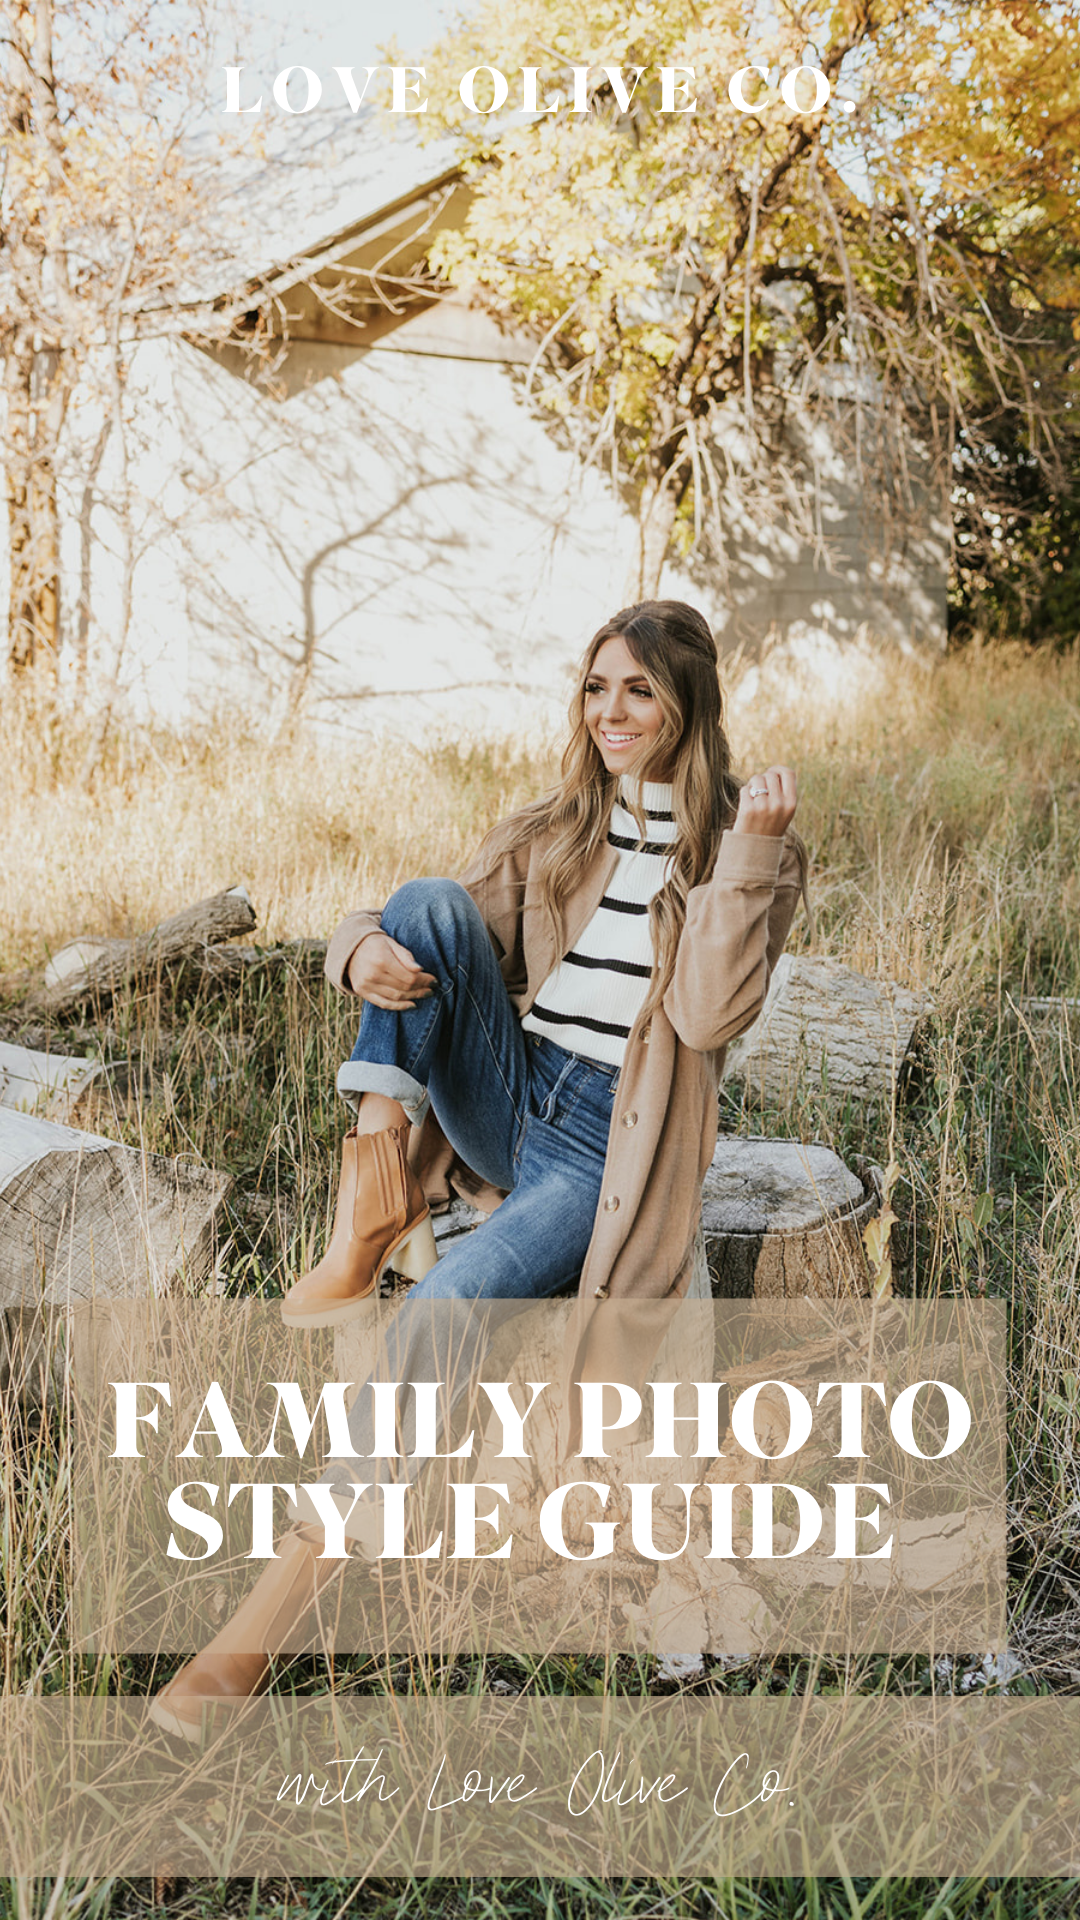 family photo style guide with love olive co. www.www.loveoliveshop.com